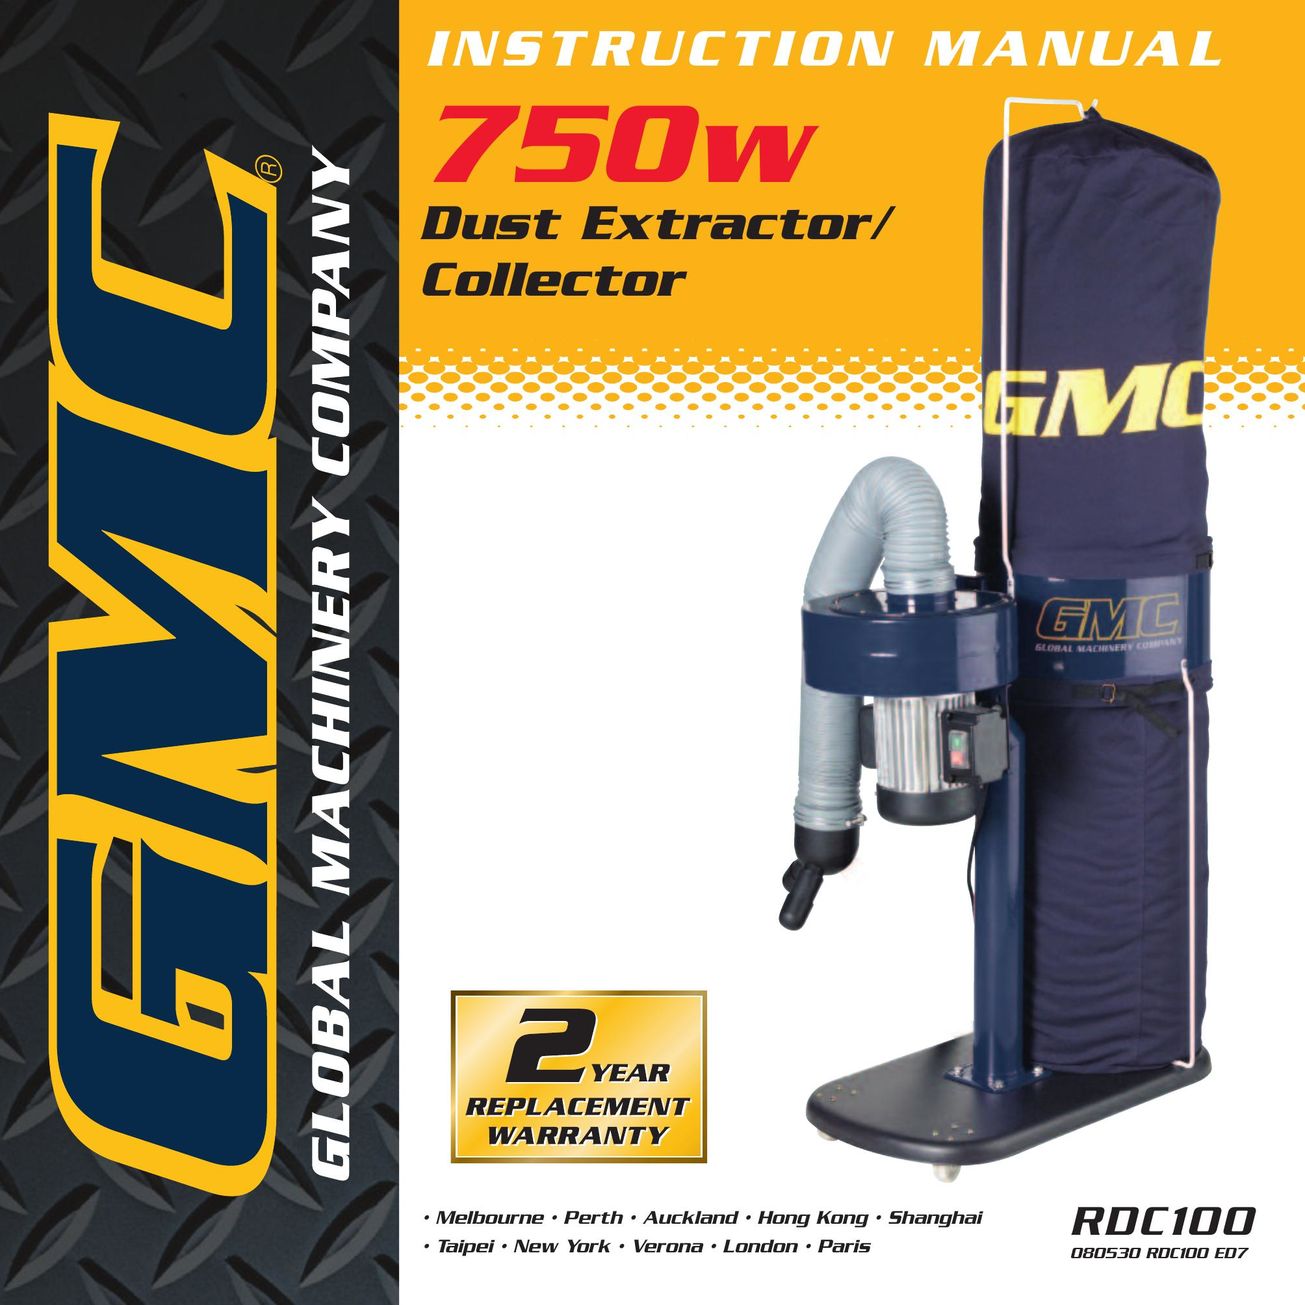 Global Machinery Company RDC100 Dust Collector User Manual